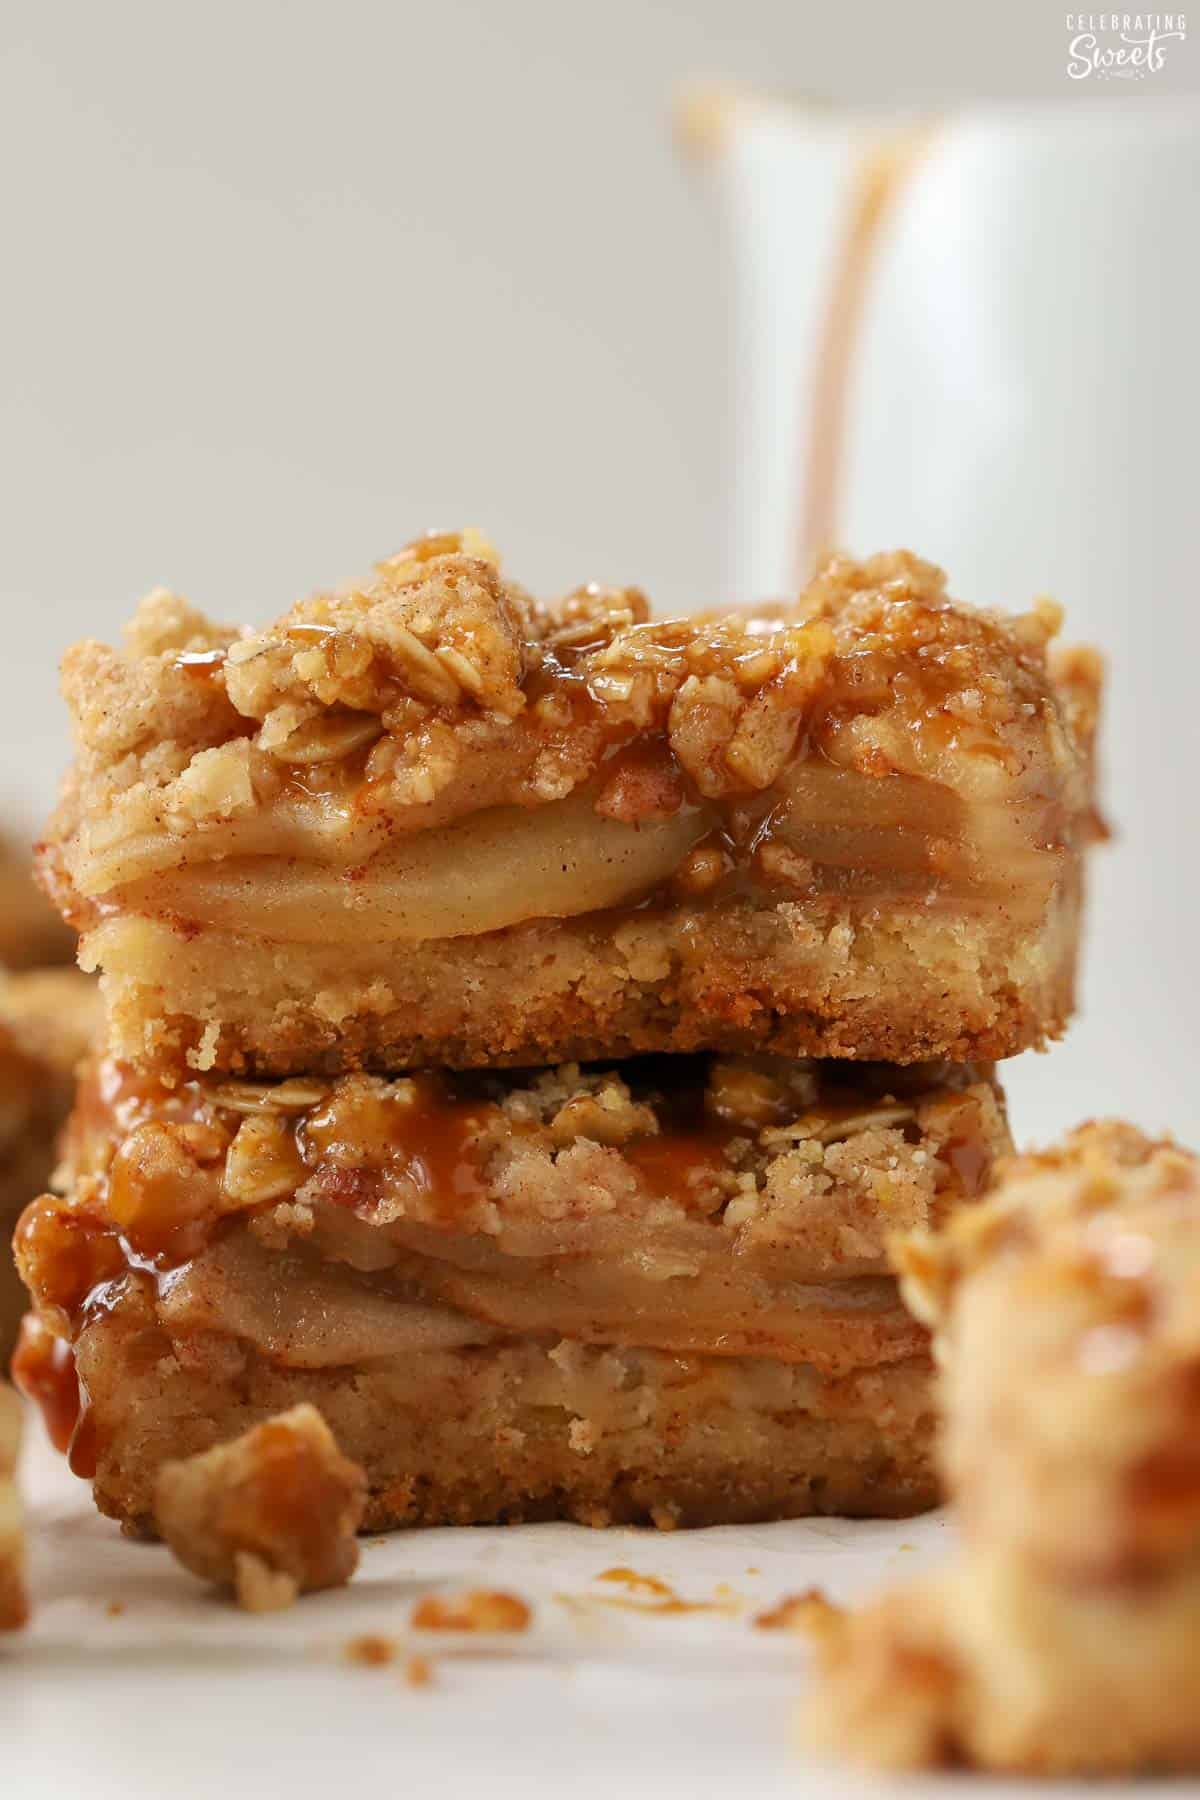 Stack of two apple crumb bars topped with caramel sauce.